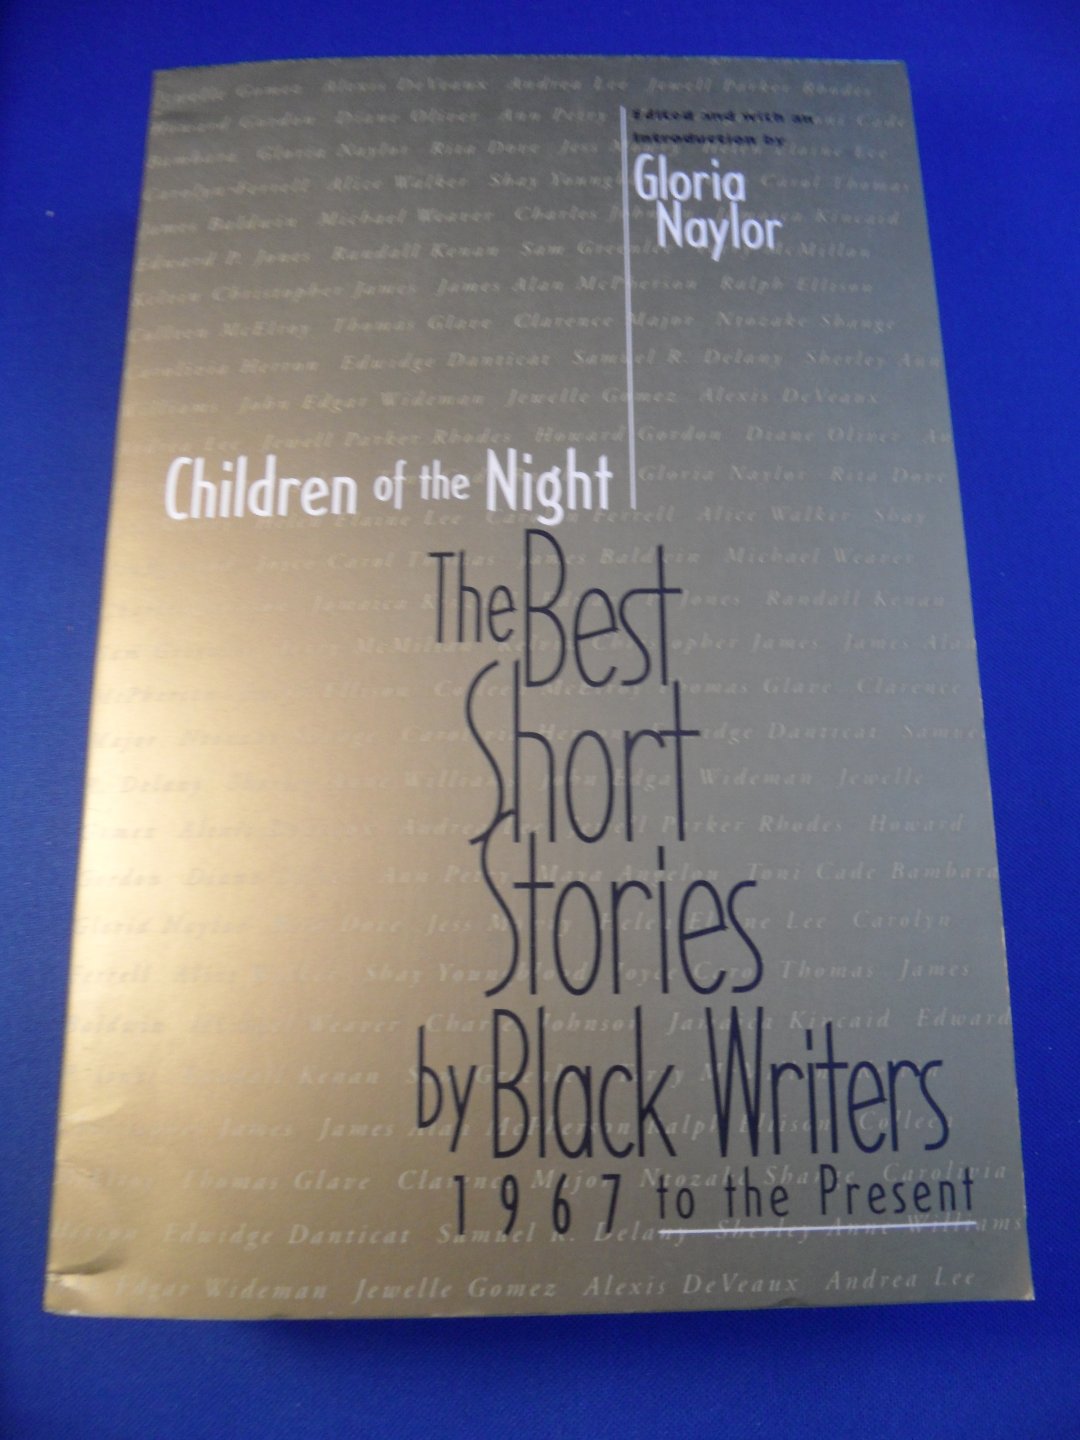 Naylor, Gloria (ed) - Children of the night. The best short stories by black writers. 1967 to present